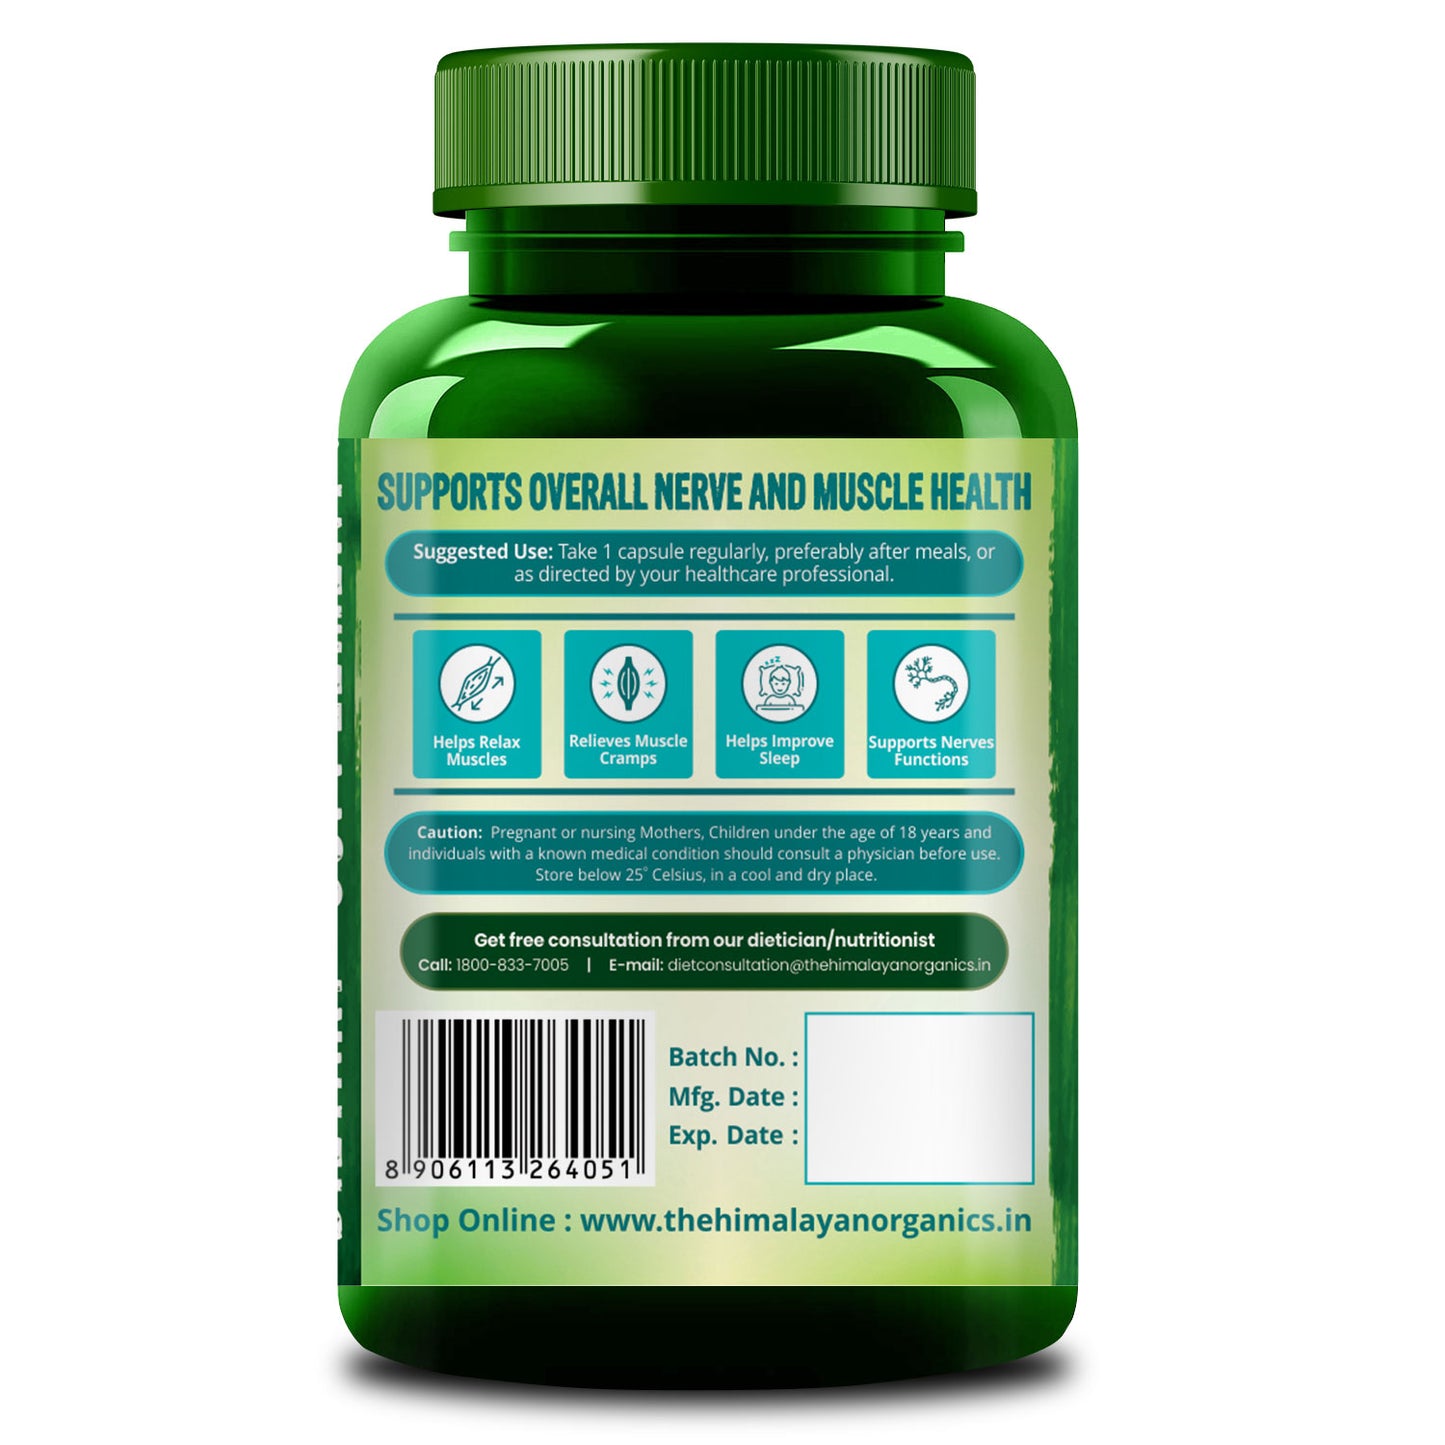 Himalayan Organics Highly Absorbable Magnesium Glycinate | Support Overall Nerve And Muscle Health | Strong Bones For Men & Women - 120 Vegetable Capsules